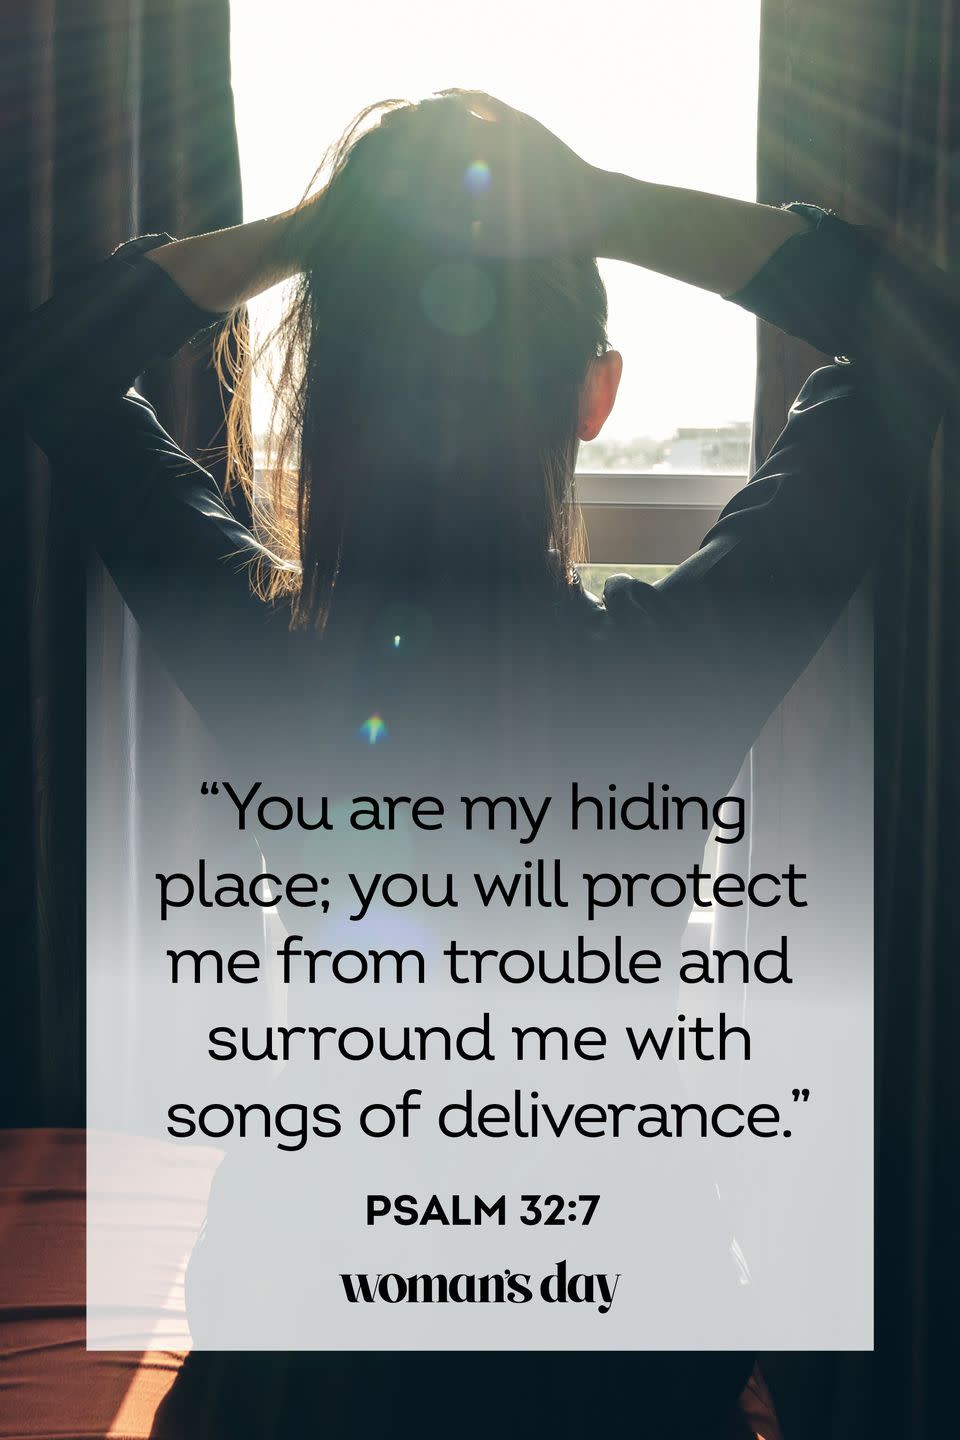 <p>“You are my hiding place; you will protect me from trouble and surround me with songs of deliverance.”</p><p><strong>The Good News: </strong>Let God be your place of refuge in tough times. He is ever present. </p>